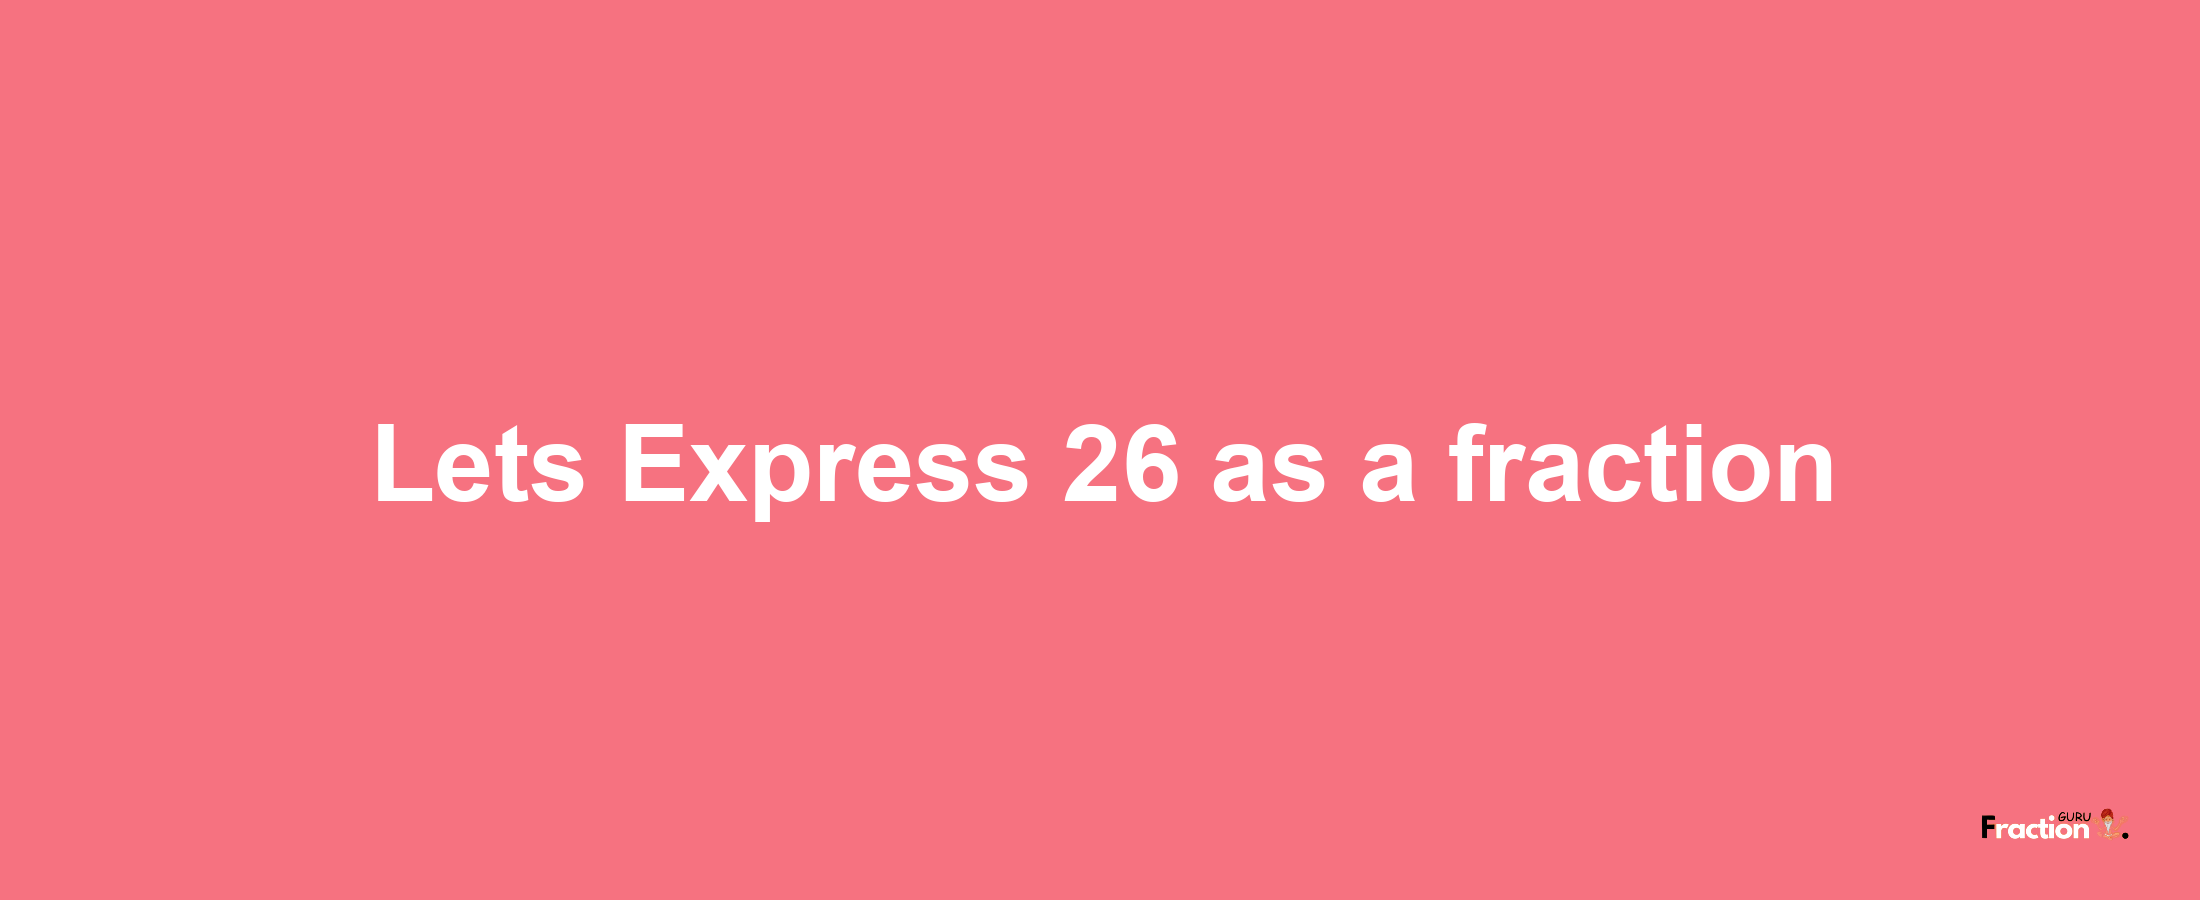 Lets Express 26 as afraction